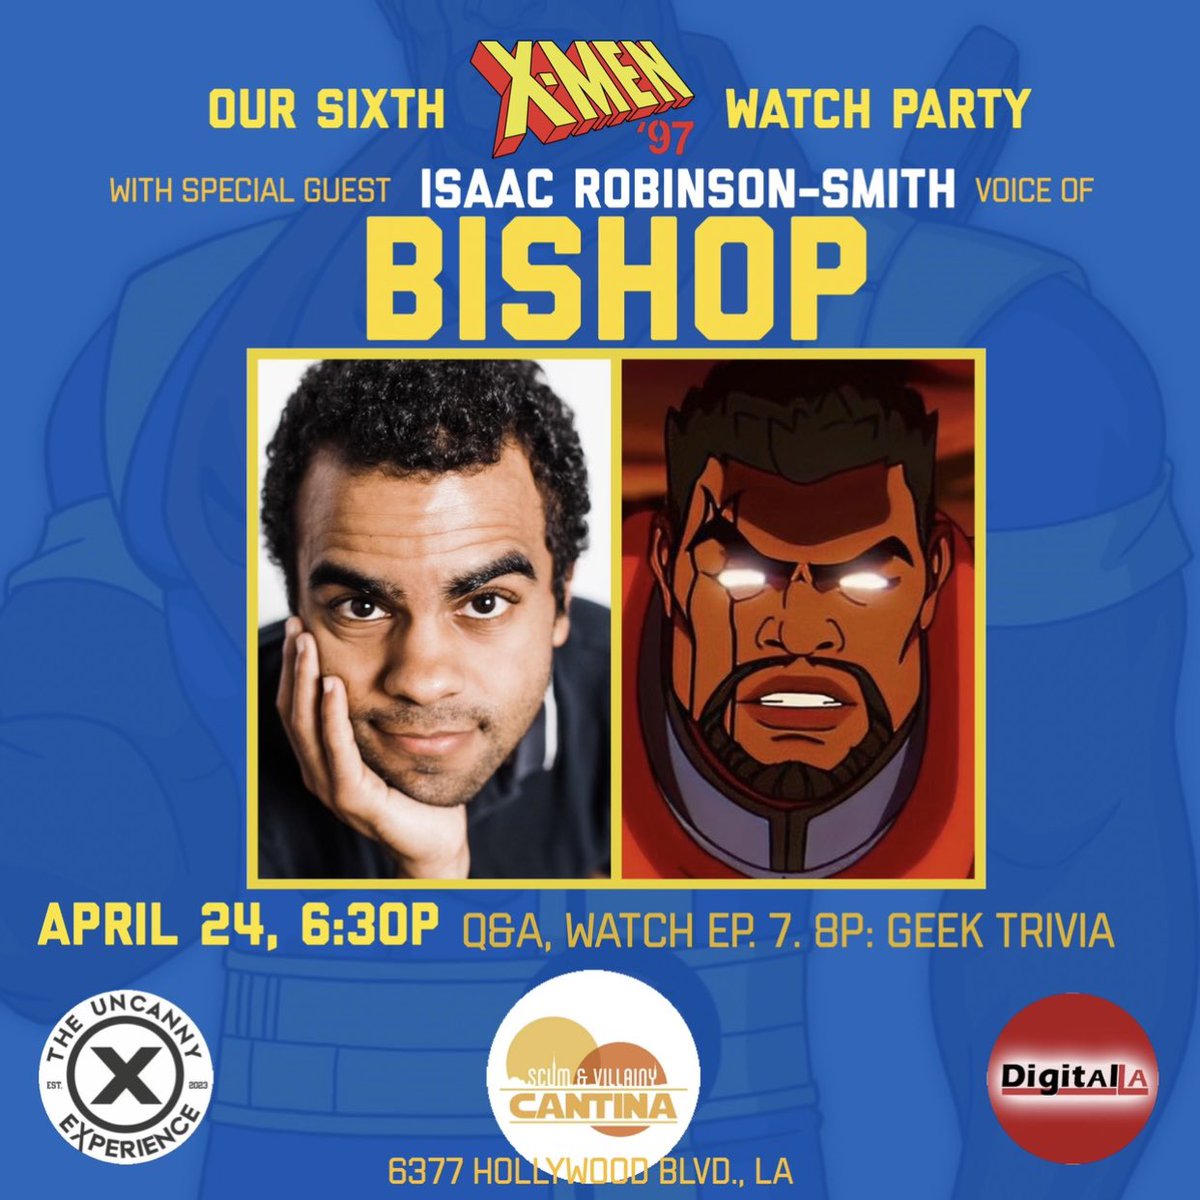 ❌ Join our watch party for the NEW X-Men ‘97 ep “Bright Eyes” with special guest @irsvoices the voice of Bishop this Wednesday at 6:30pm at Scum & Villainy Cantina! With a Q&A 🙋‍♂️Screening 📺 & group photo op 📸 Presented by: @theuncannyexp & @digitalla See you there, mutants! 🎆